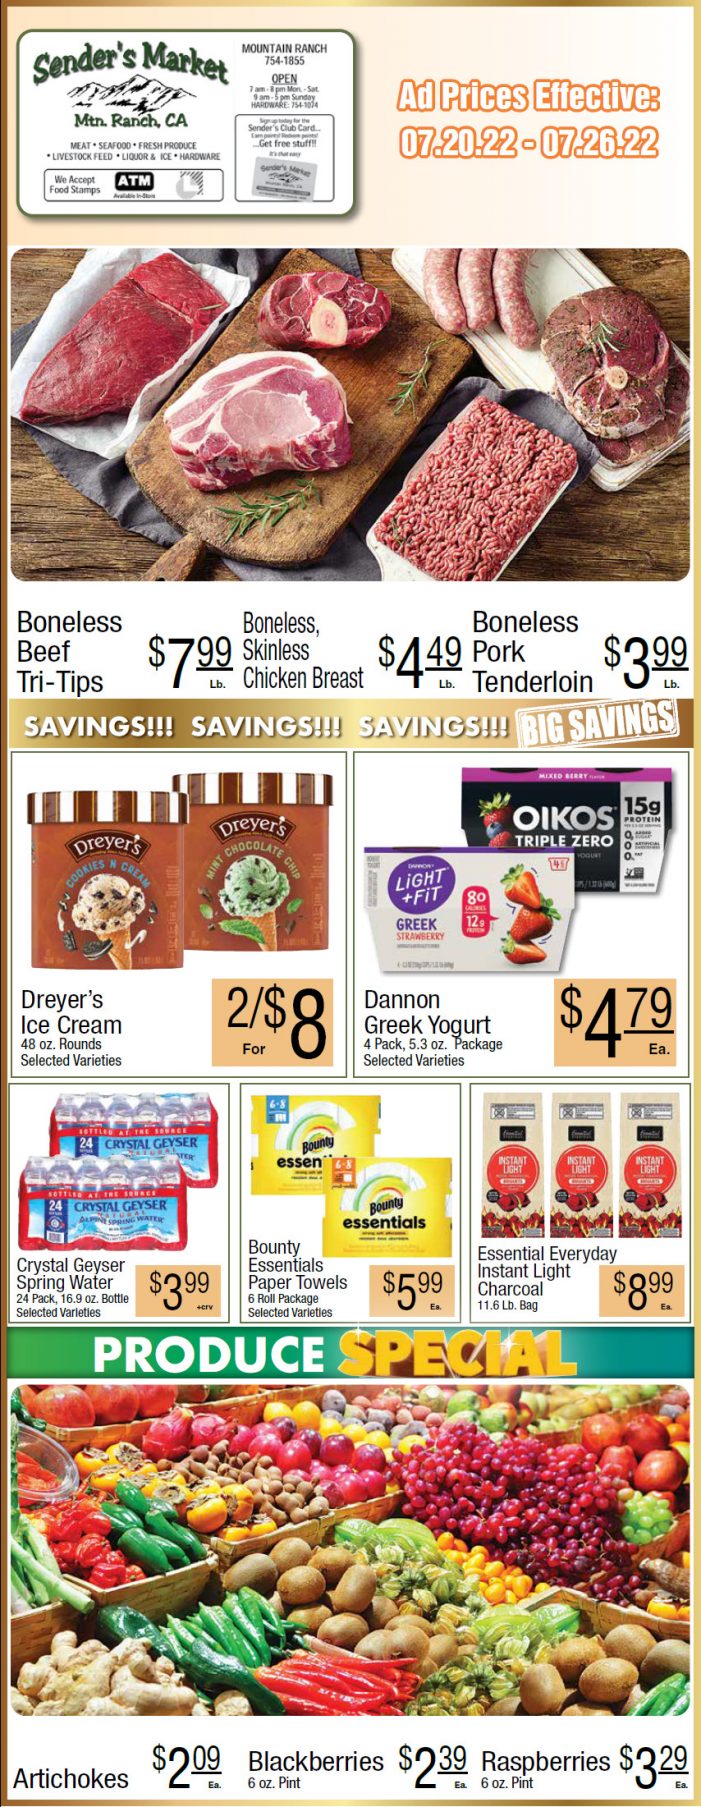 Sender’s Market Weekly Ad & Grocery Specials Through July 20 – 26th!  Shop Local & Save!